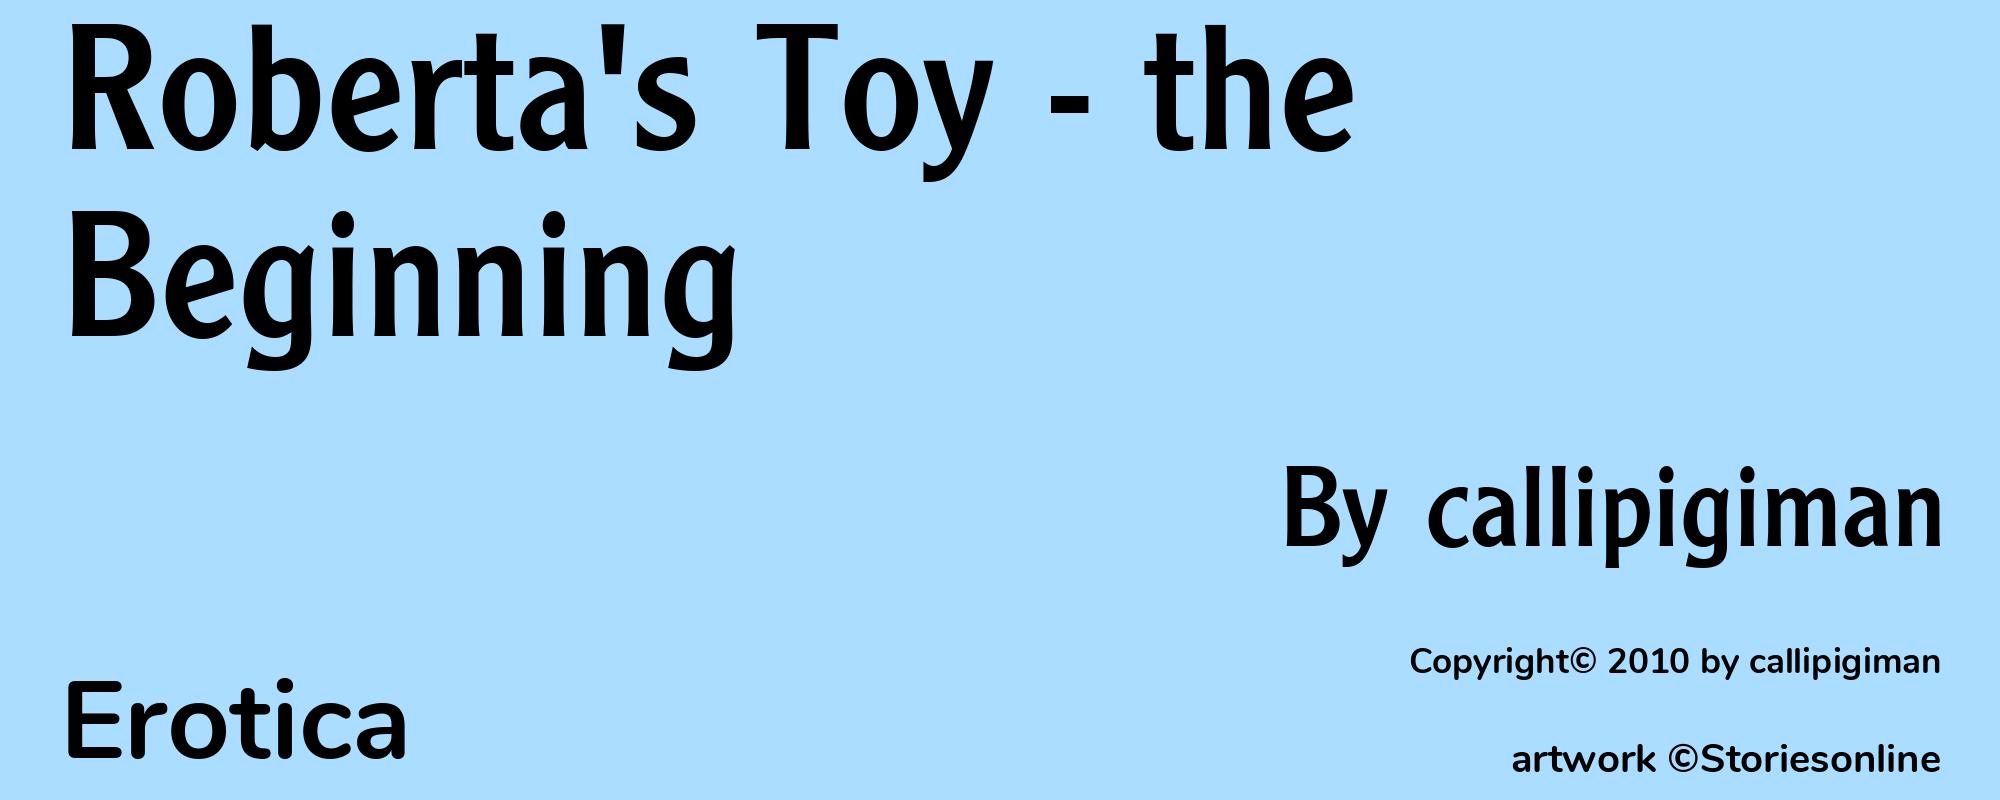 Roberta's Toy - the Beginning - Cover